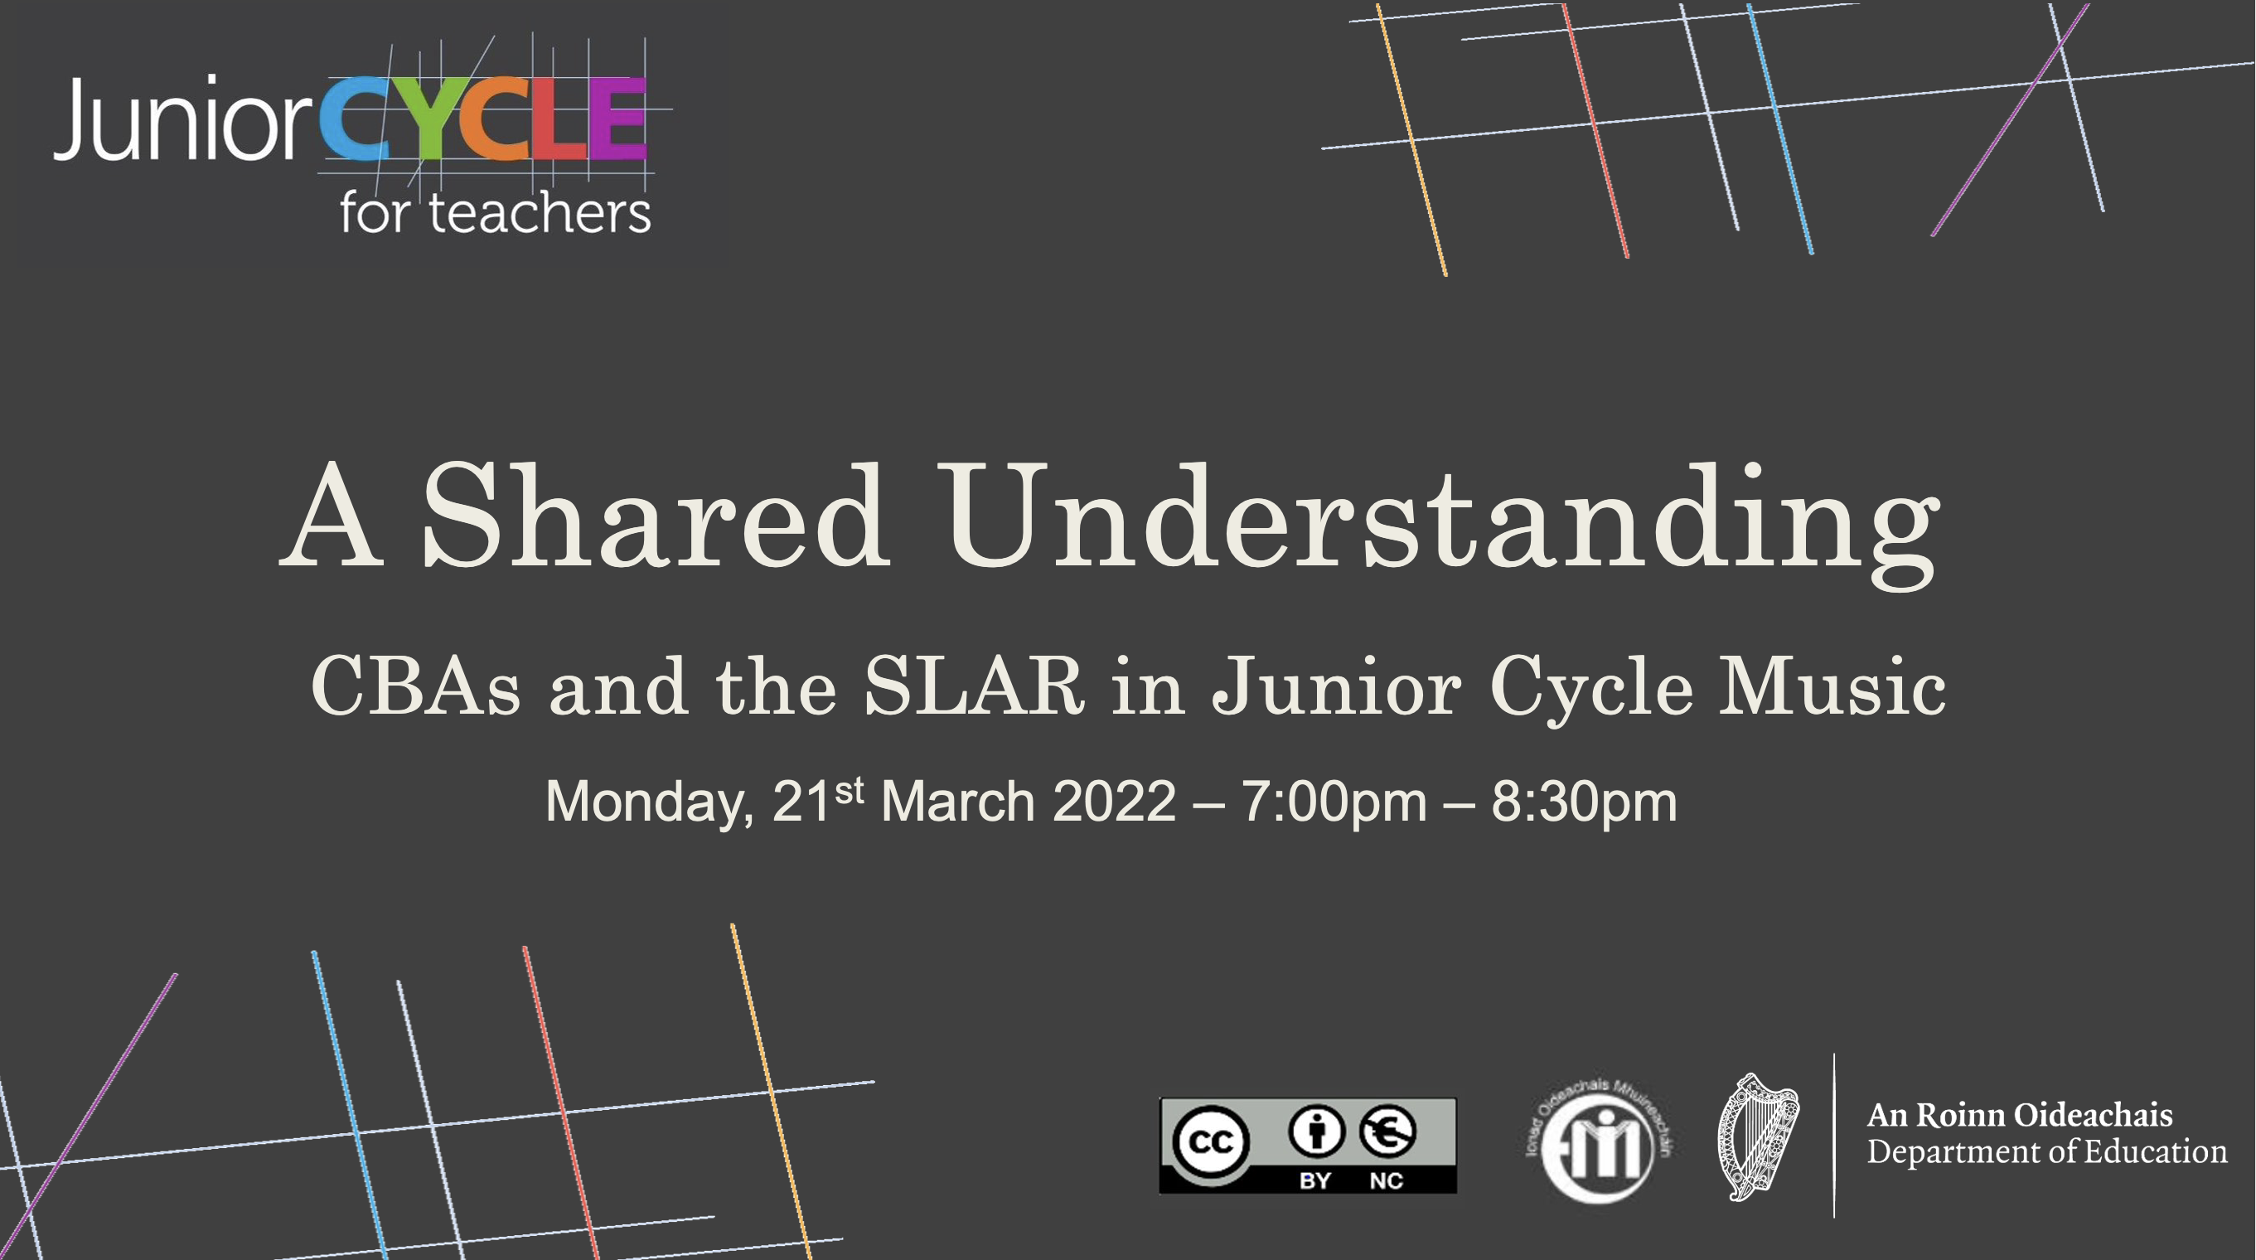 A Shared Understanding: CBAs and the SLAR in Junior Cycle Music